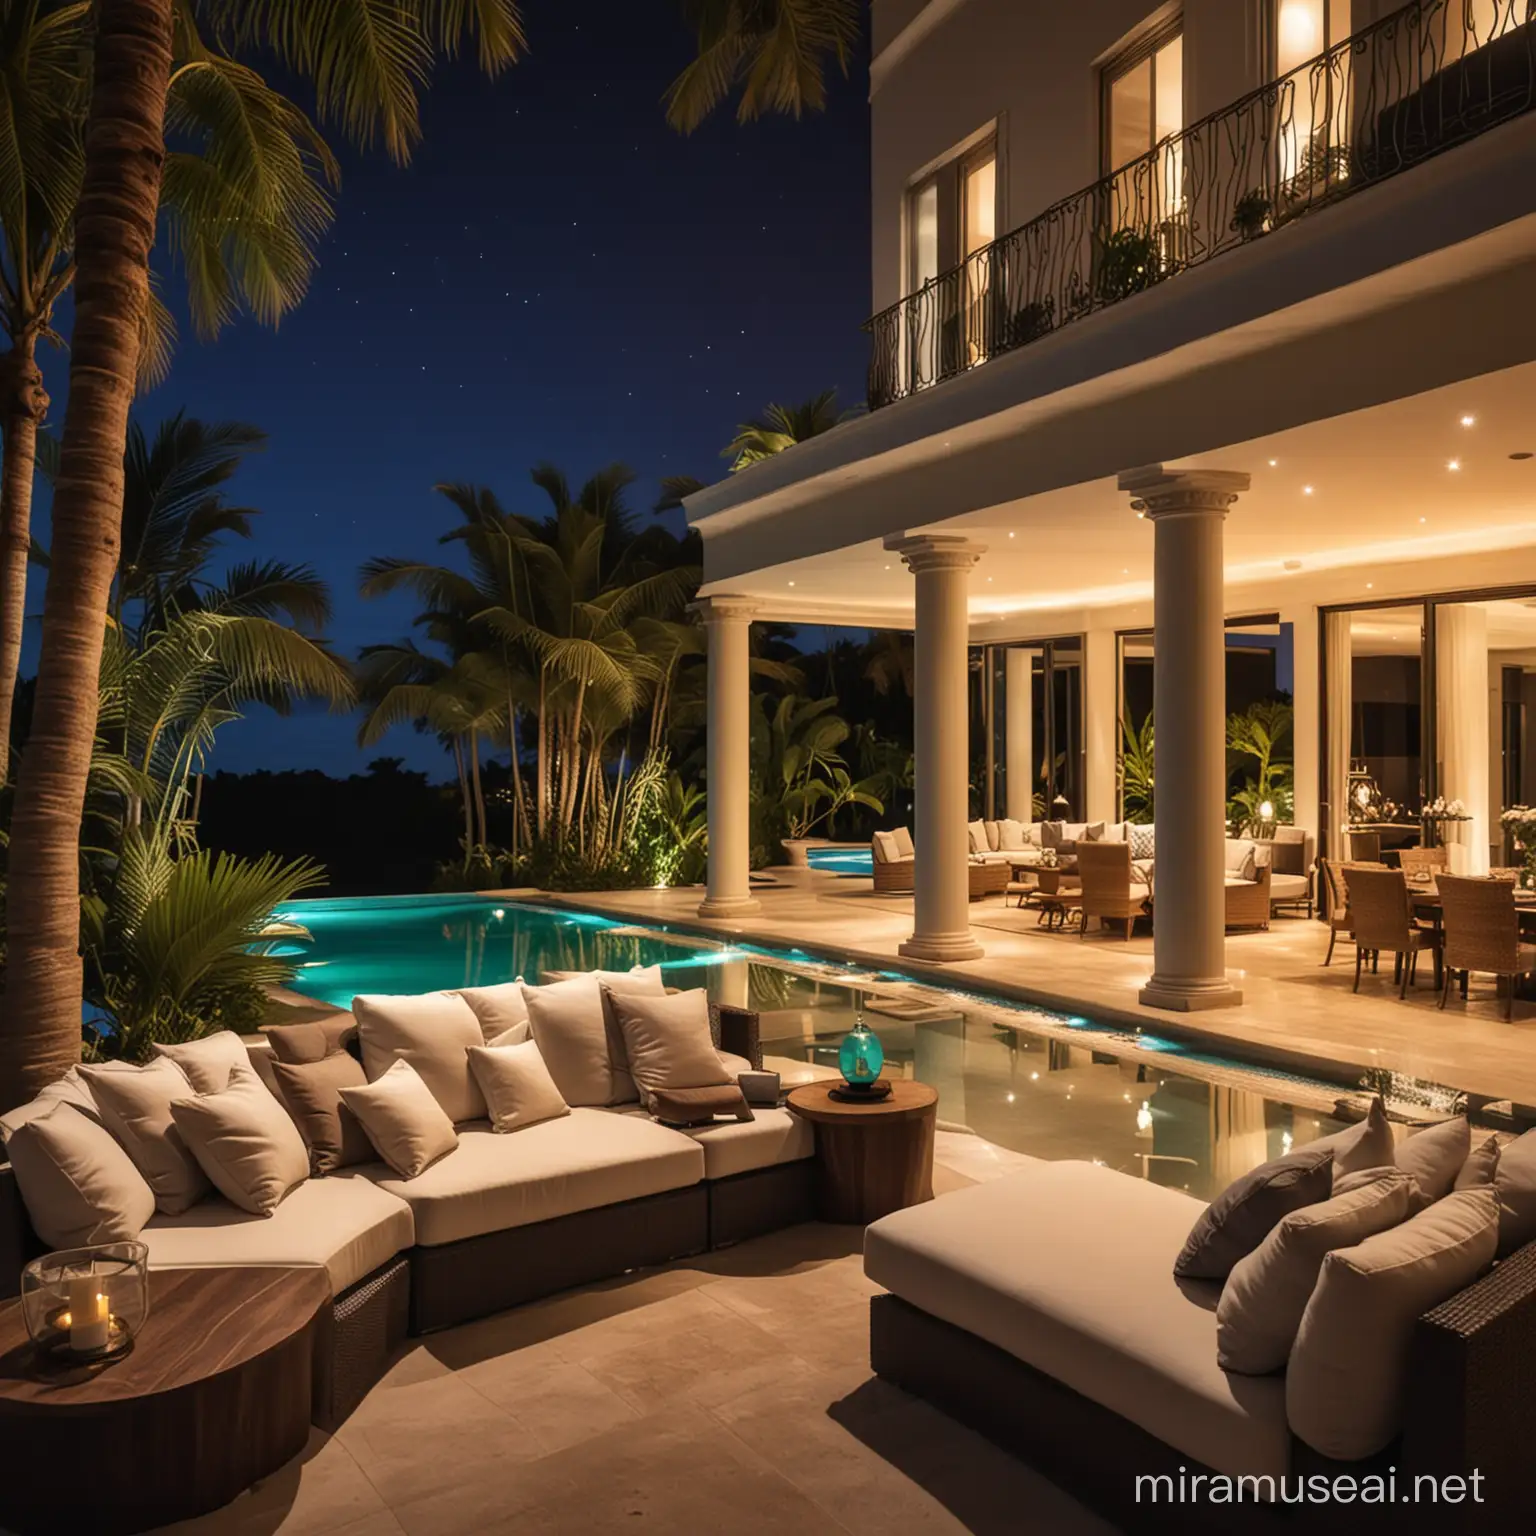 Luxurious Tropical Mansion Lounge at Night